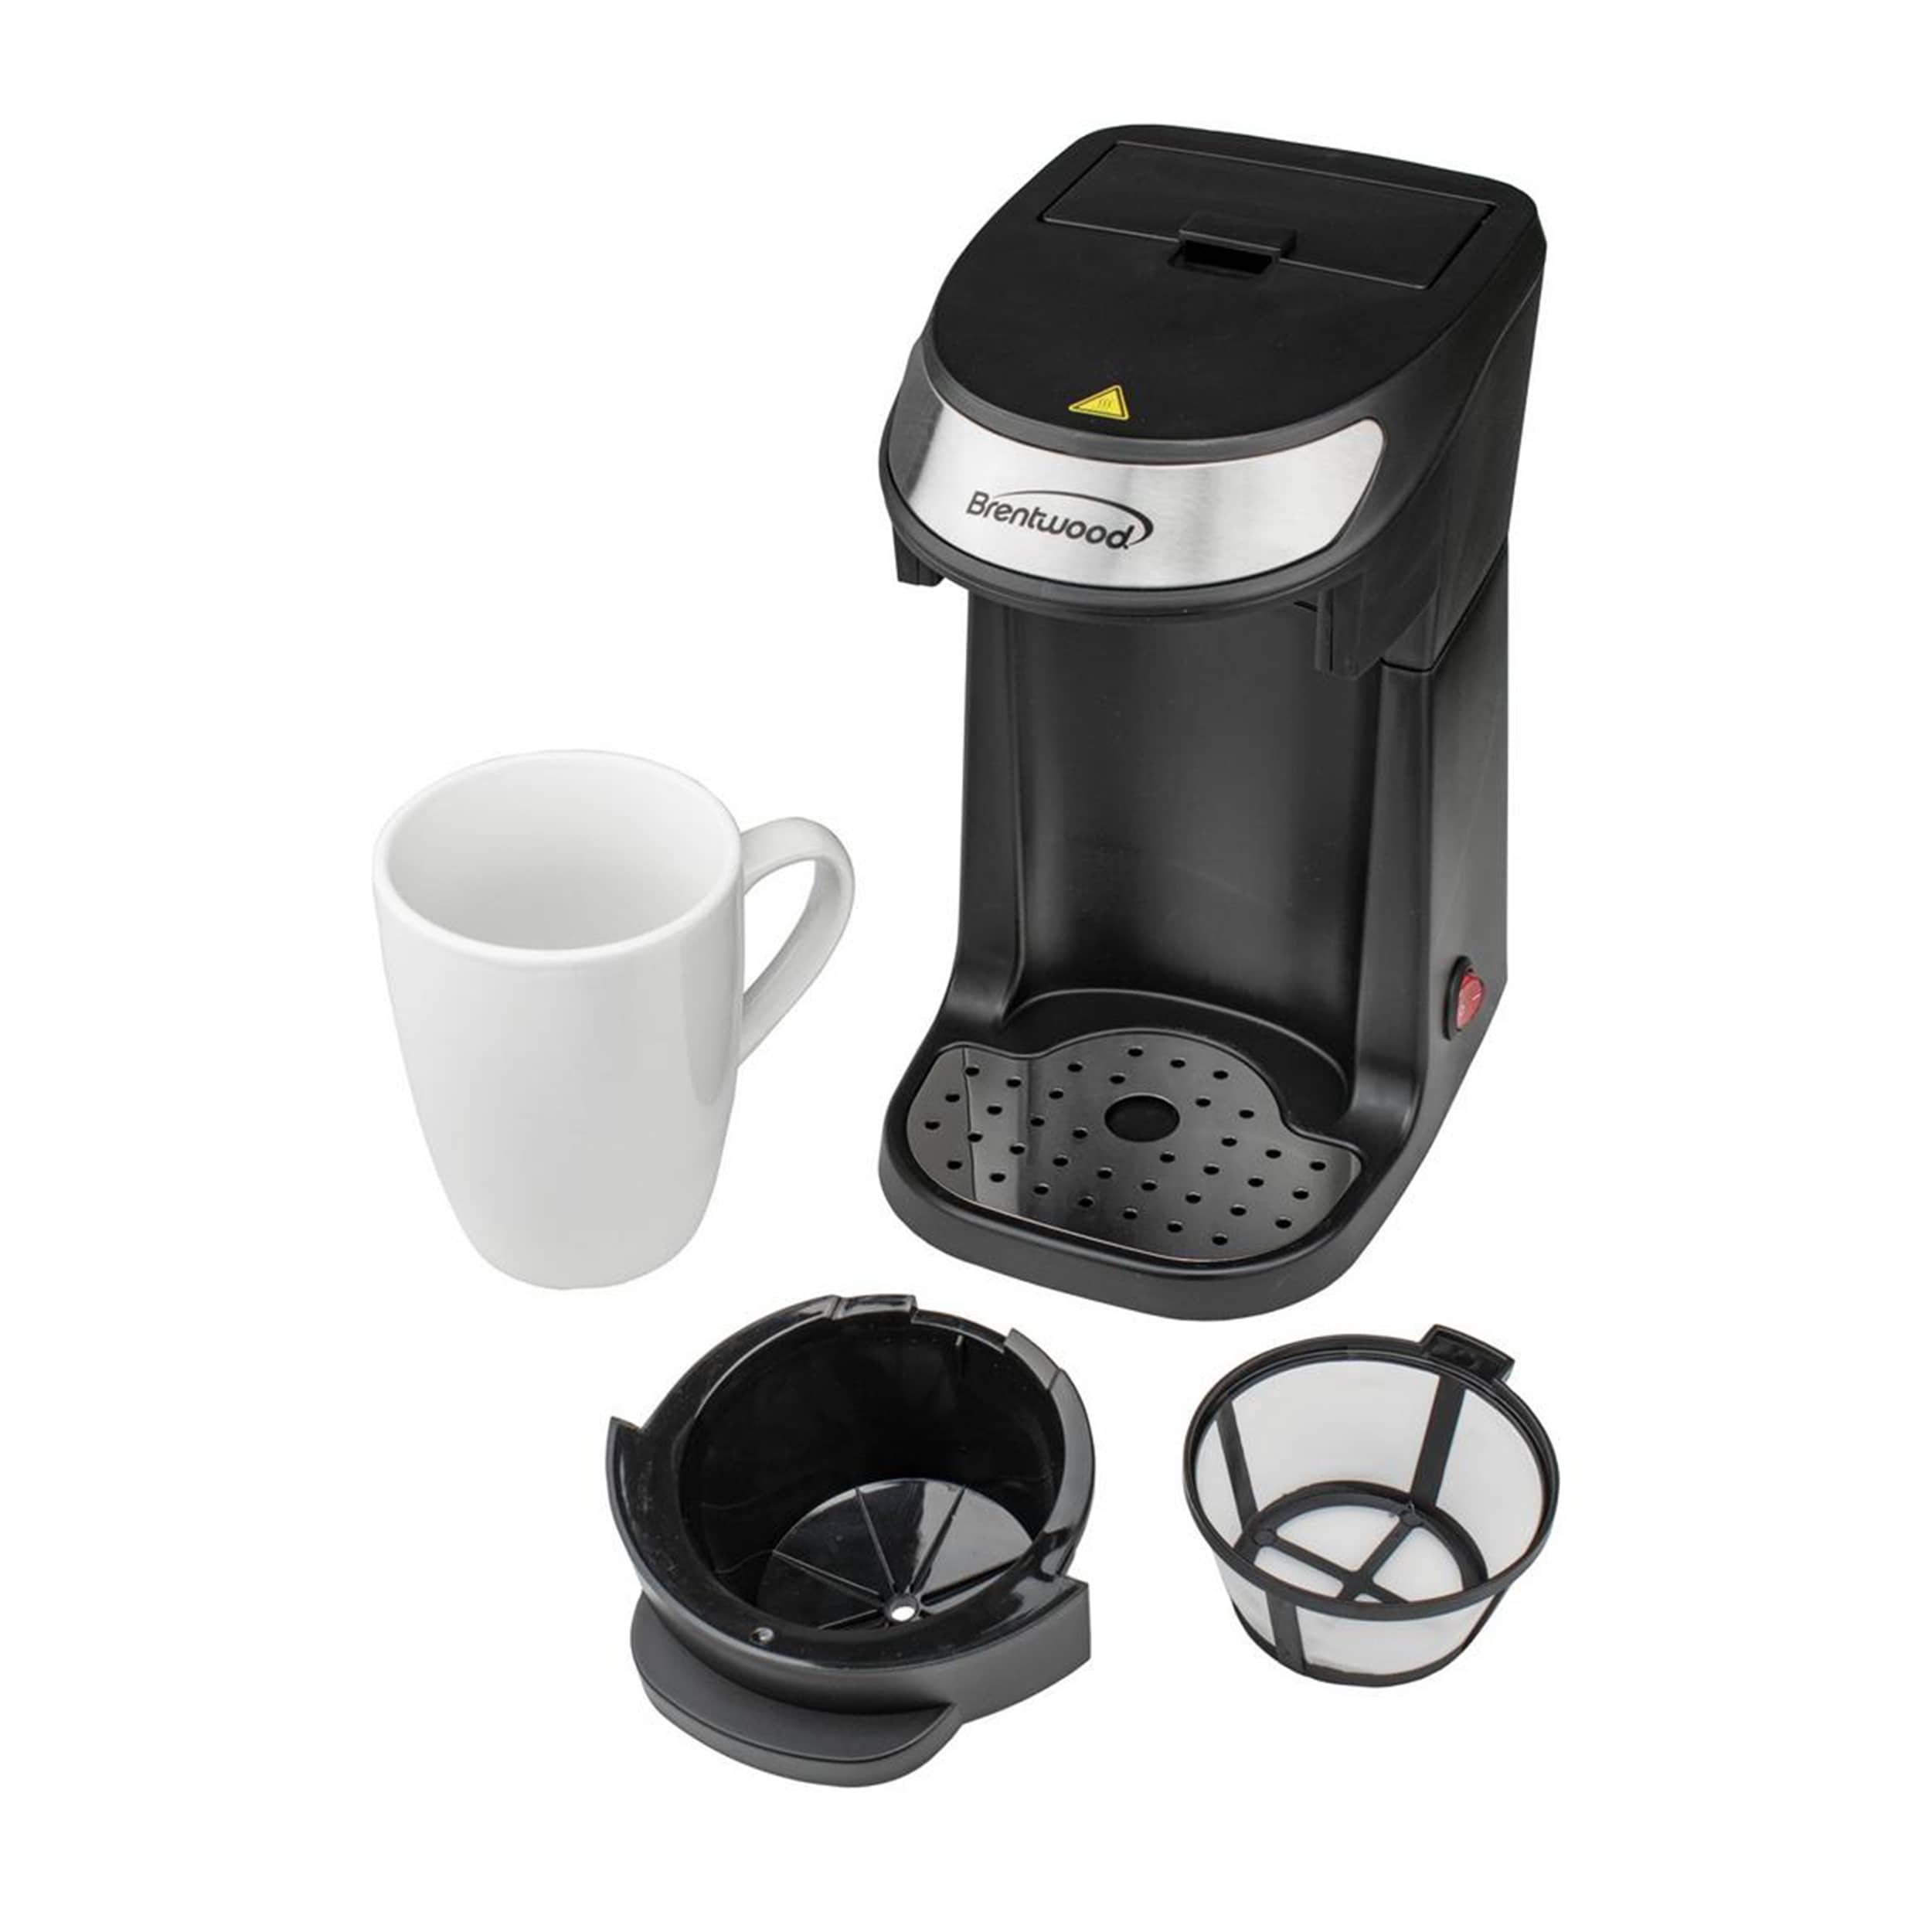 Brentwood Portable Single Serve Coffee Maker with 14oz Travel Mug in Black - 1 Cup